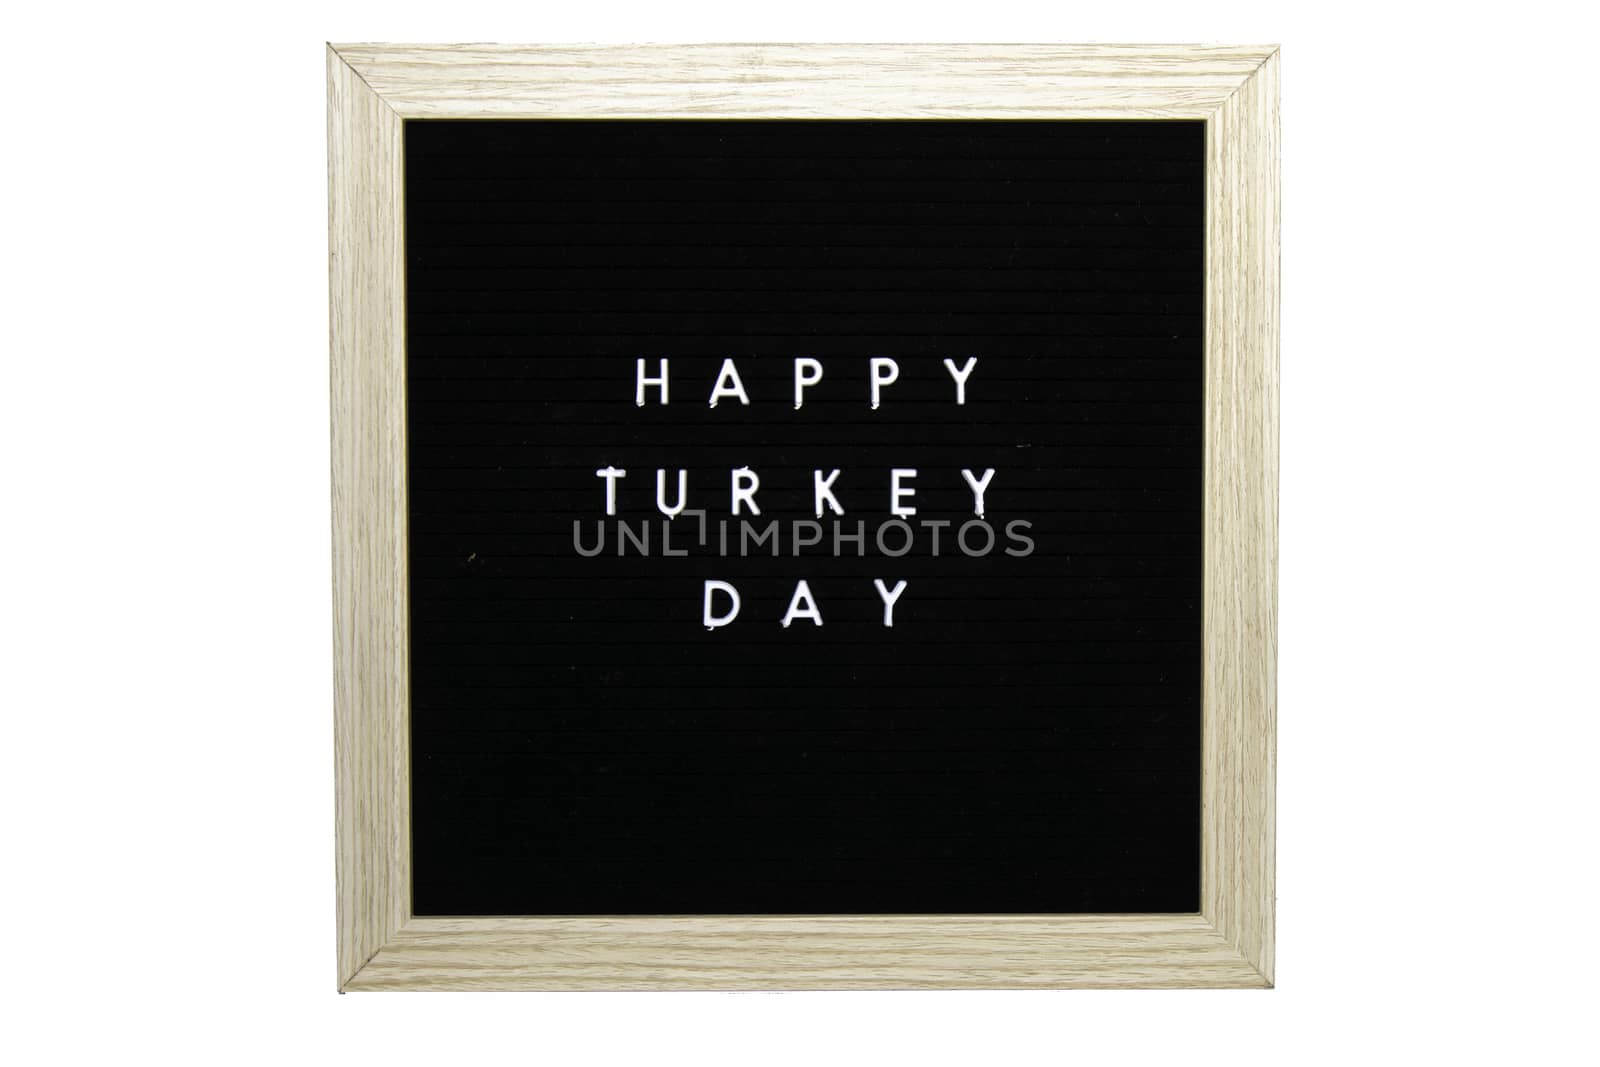 A Black Sign With a Birch Frame That Says Happy Turkey Day in White Letters on a Pure White Background